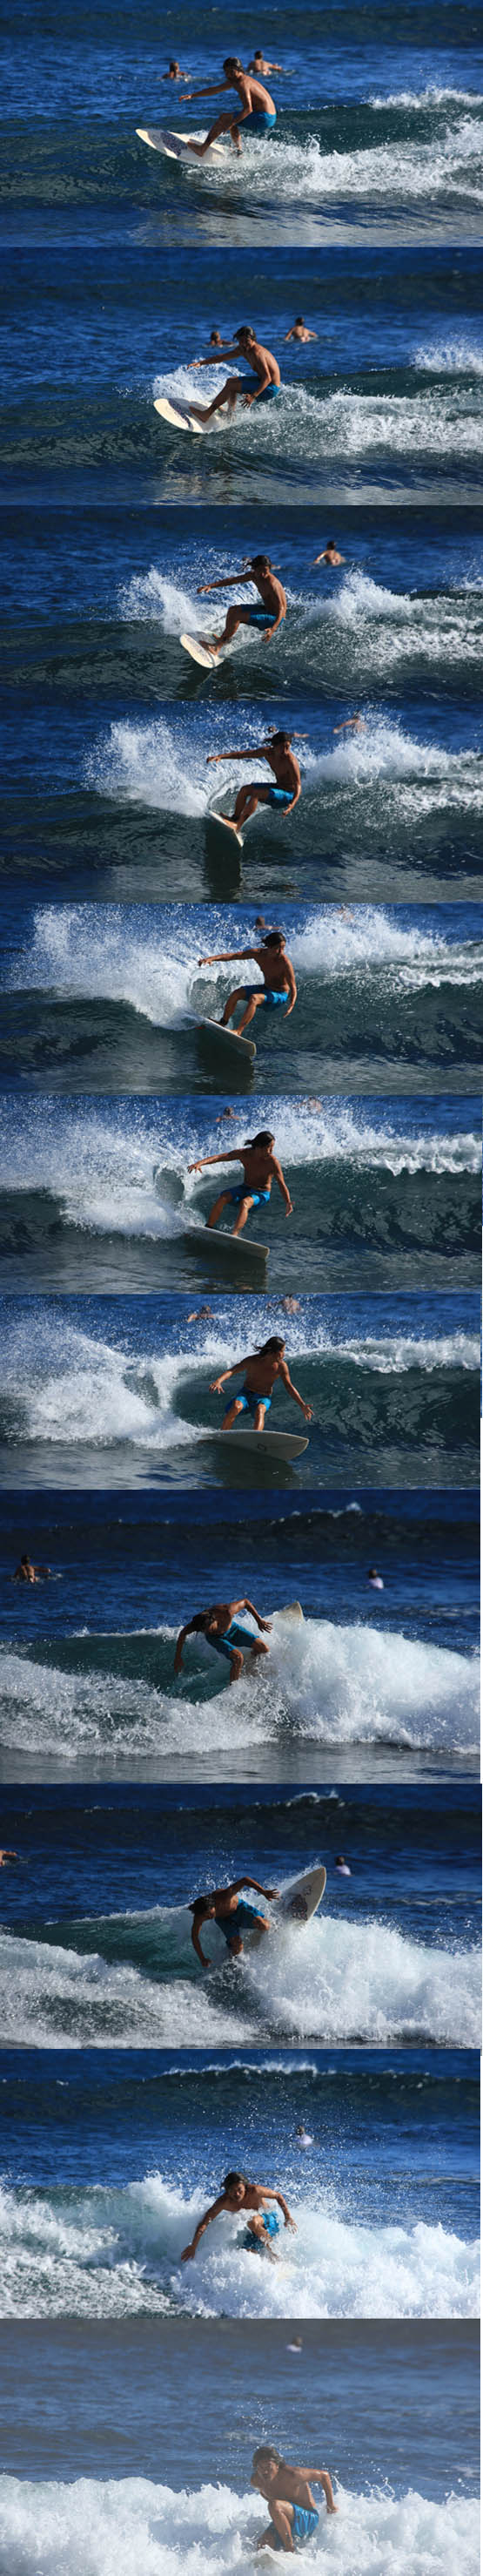 2010_NH_Surfing_T5987